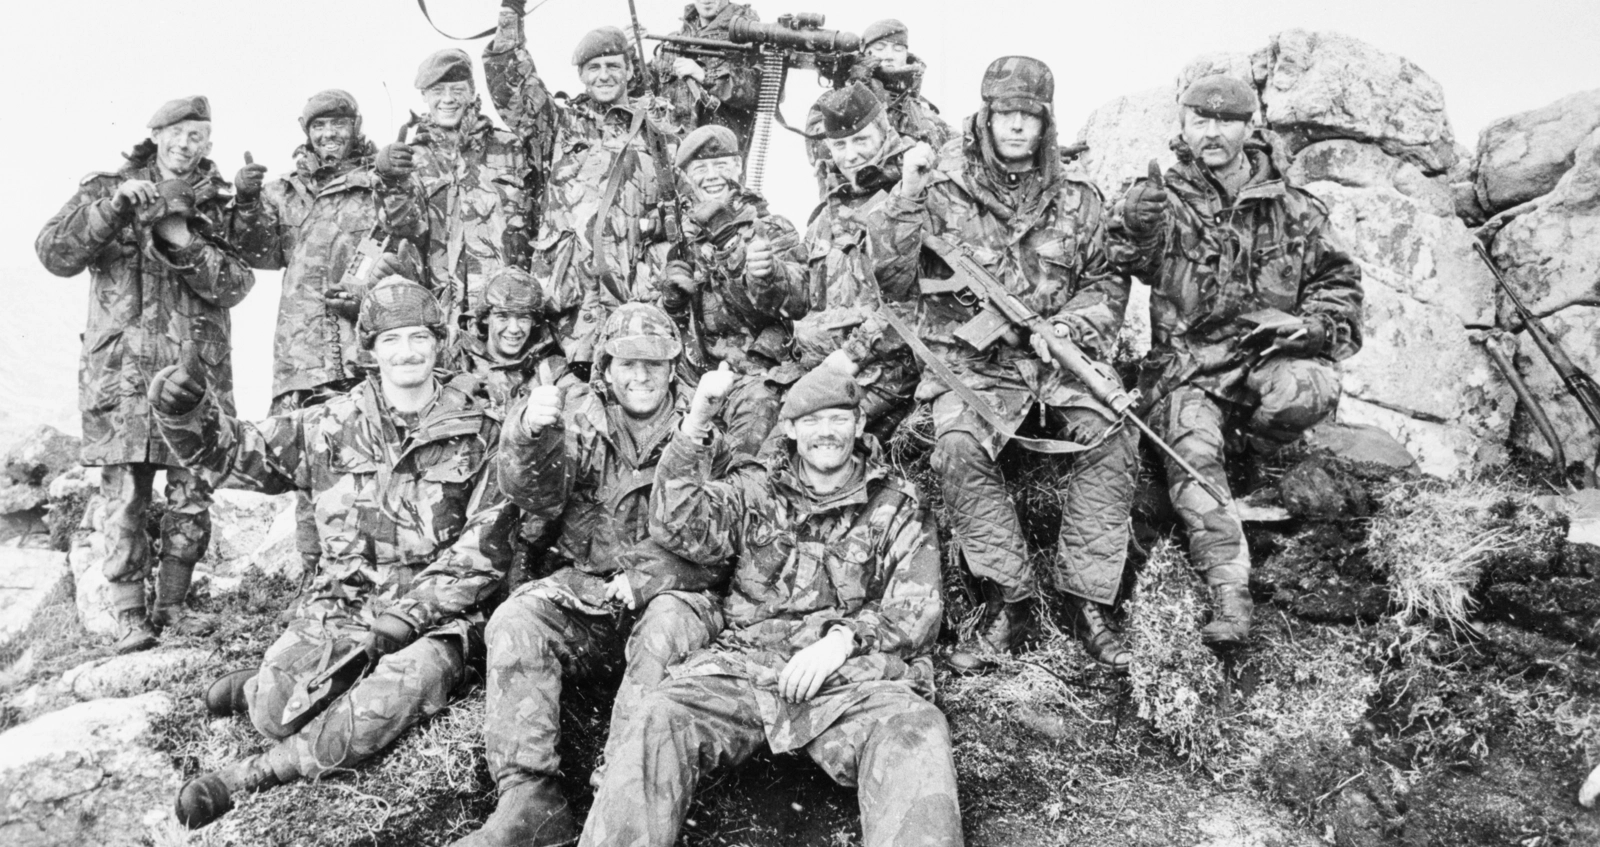 Group photos of soldiers in the Falklands